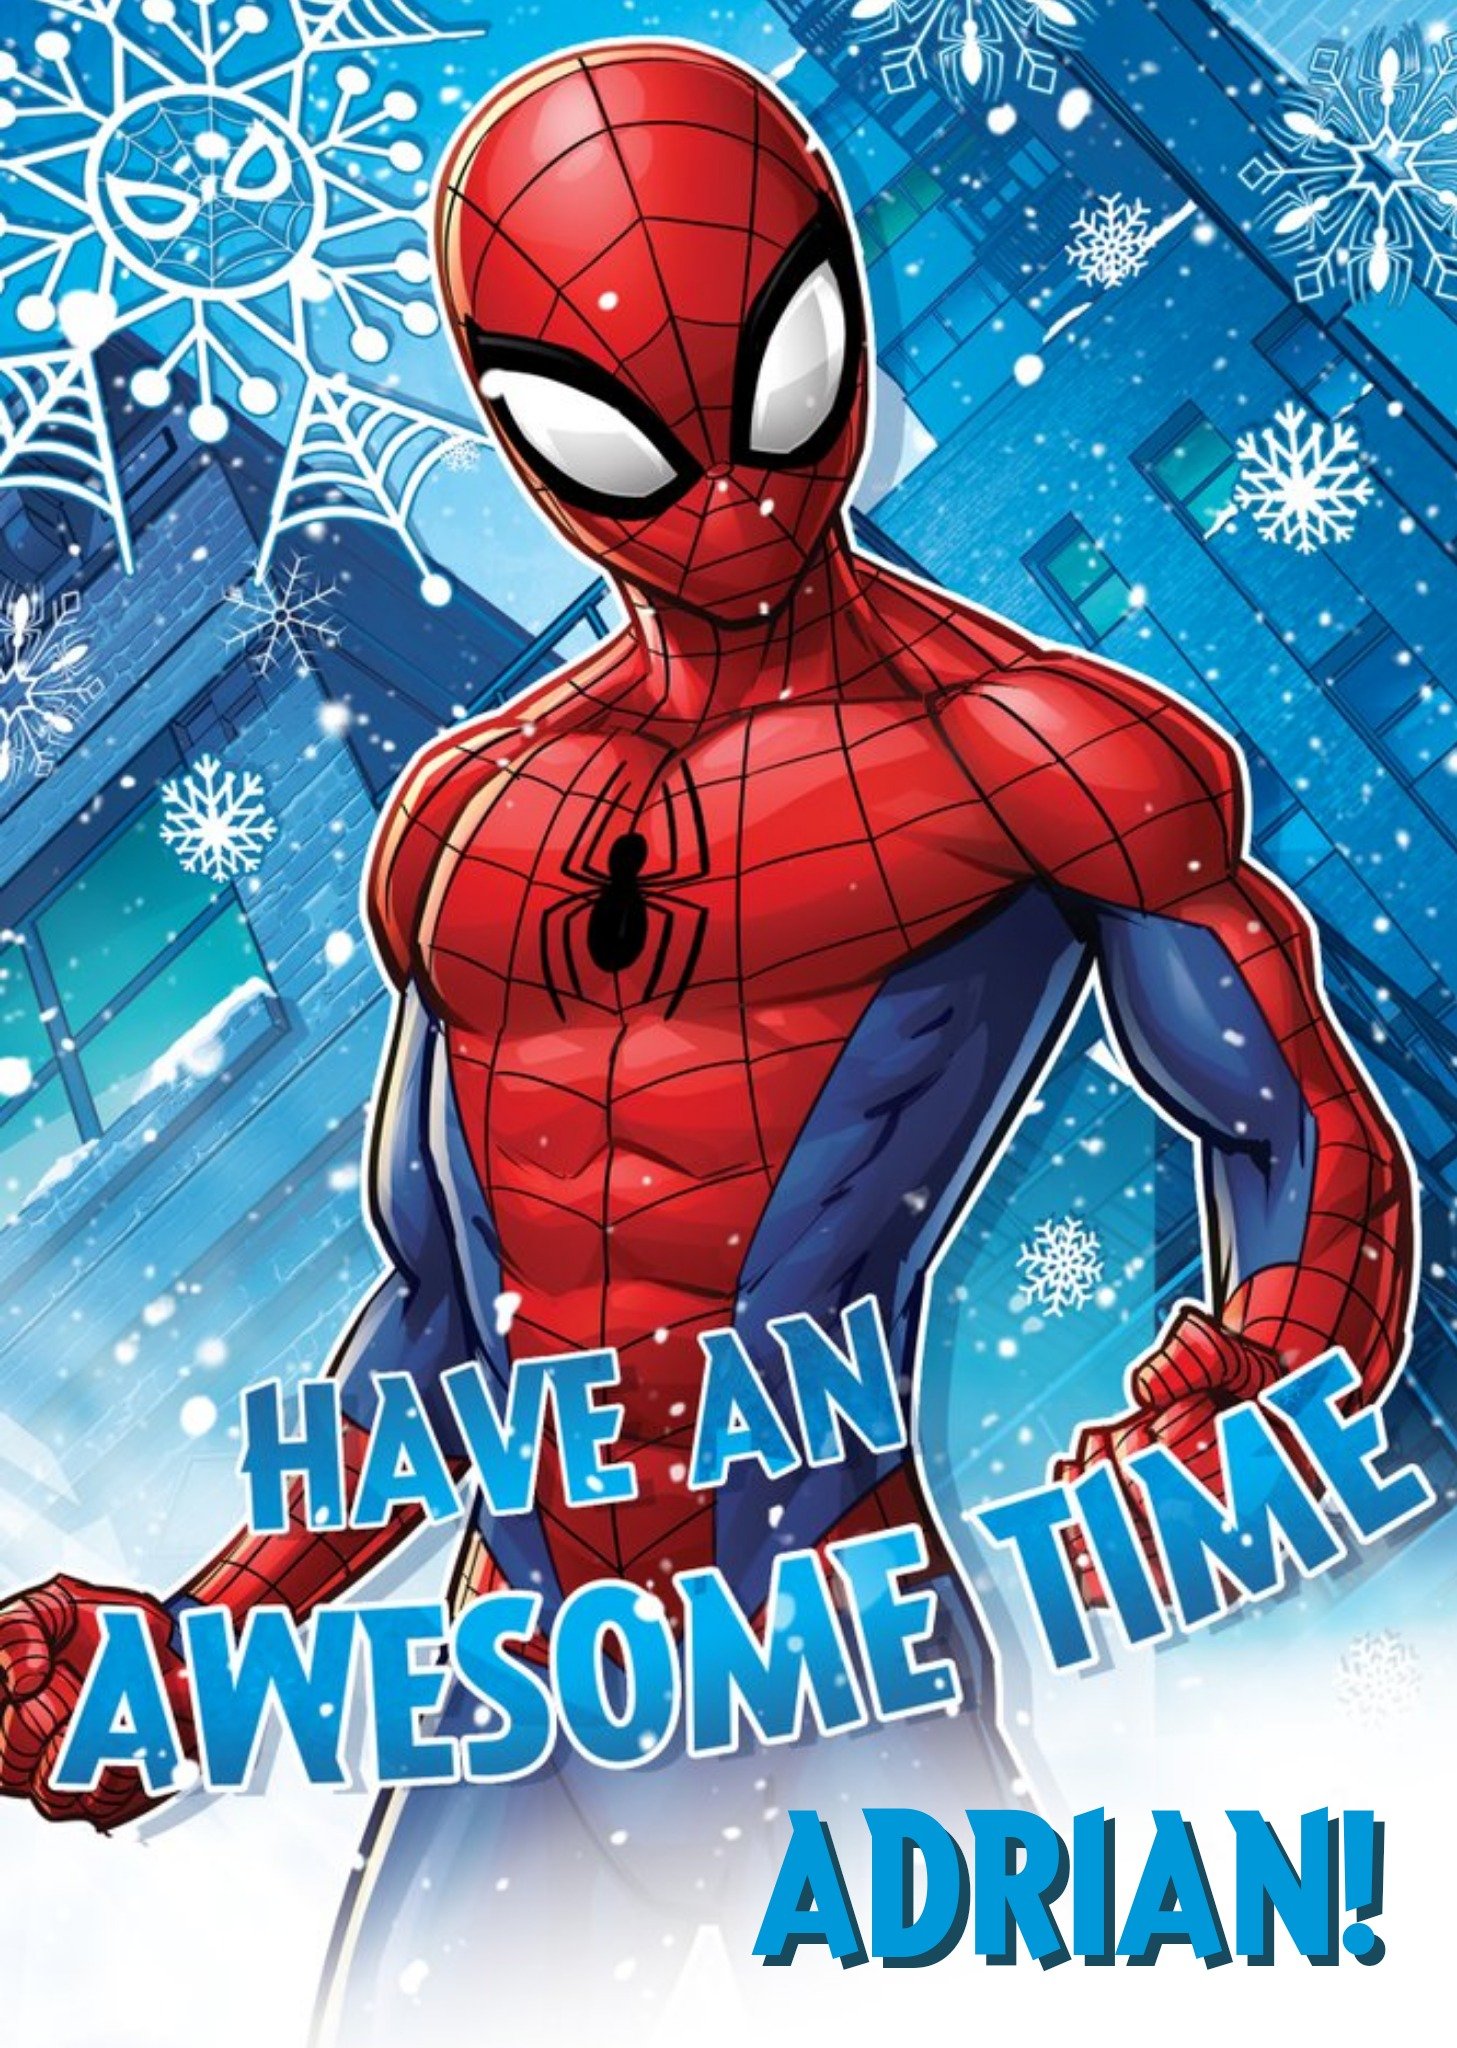 Marvel Spiderman Awesome Time Personalised Christmas Card Ecard